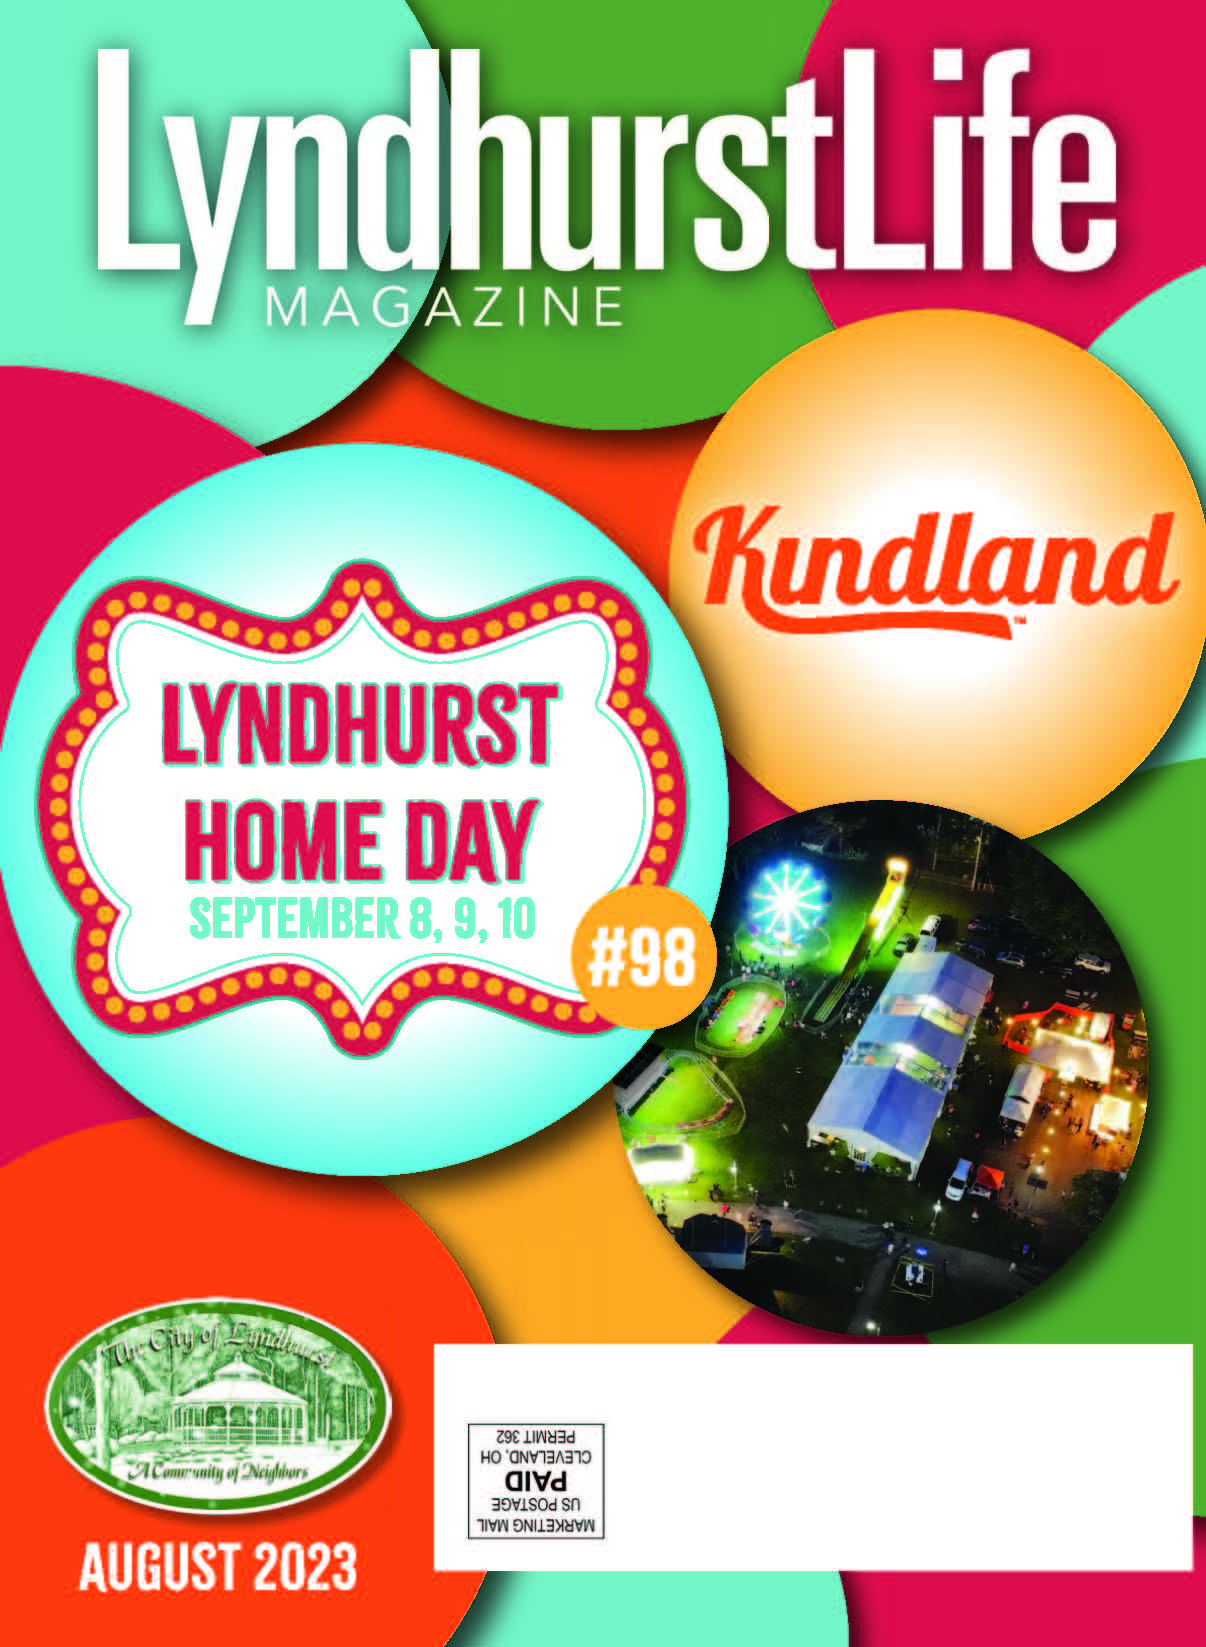 blue, orange, yellow, green bubbles with Home Day & Kindland logo in bubbles